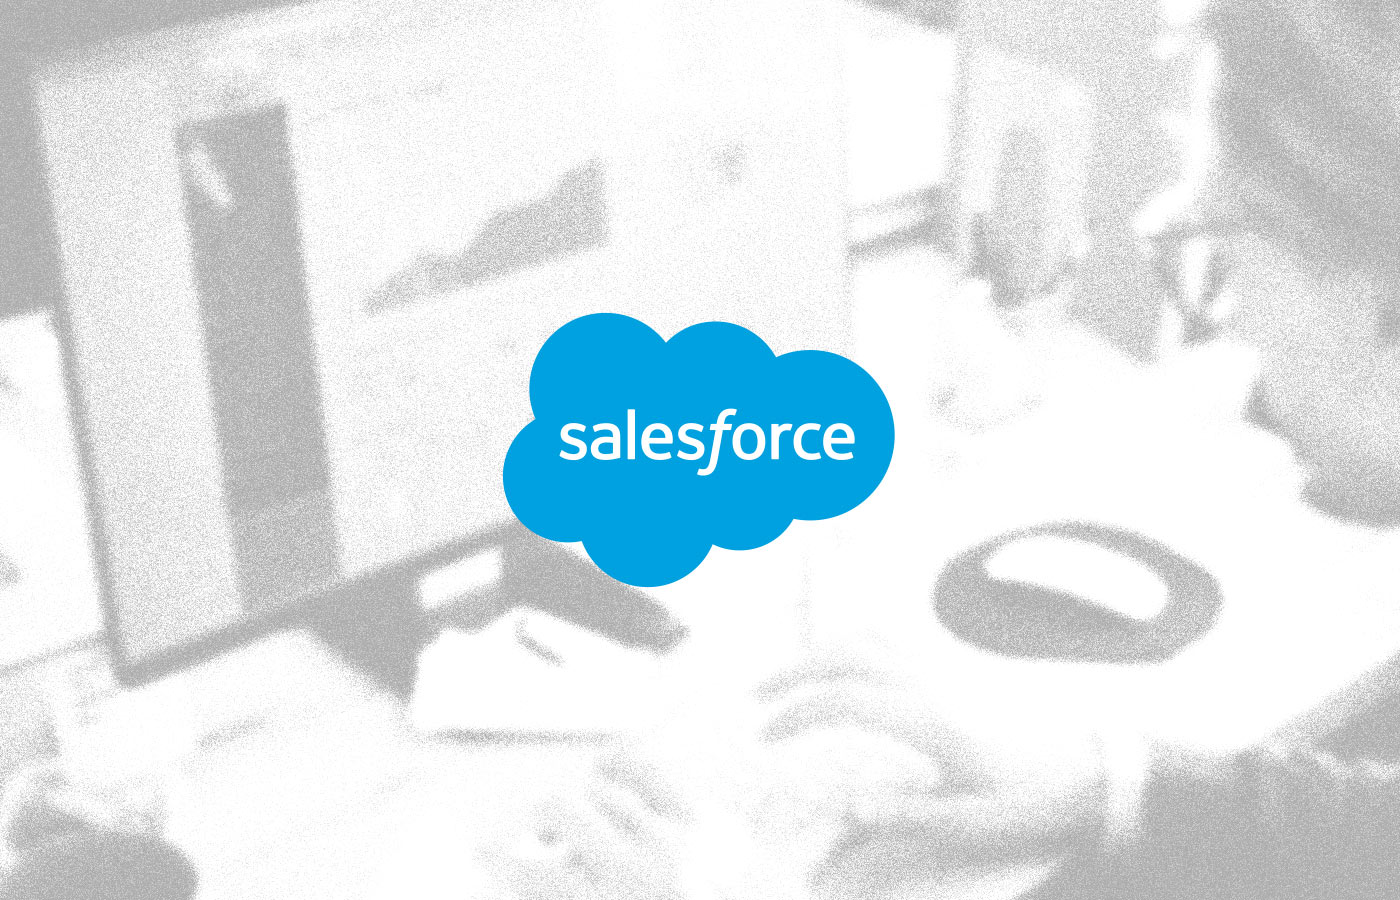 Salesforce logo overlayed on an image of someone working at a computer